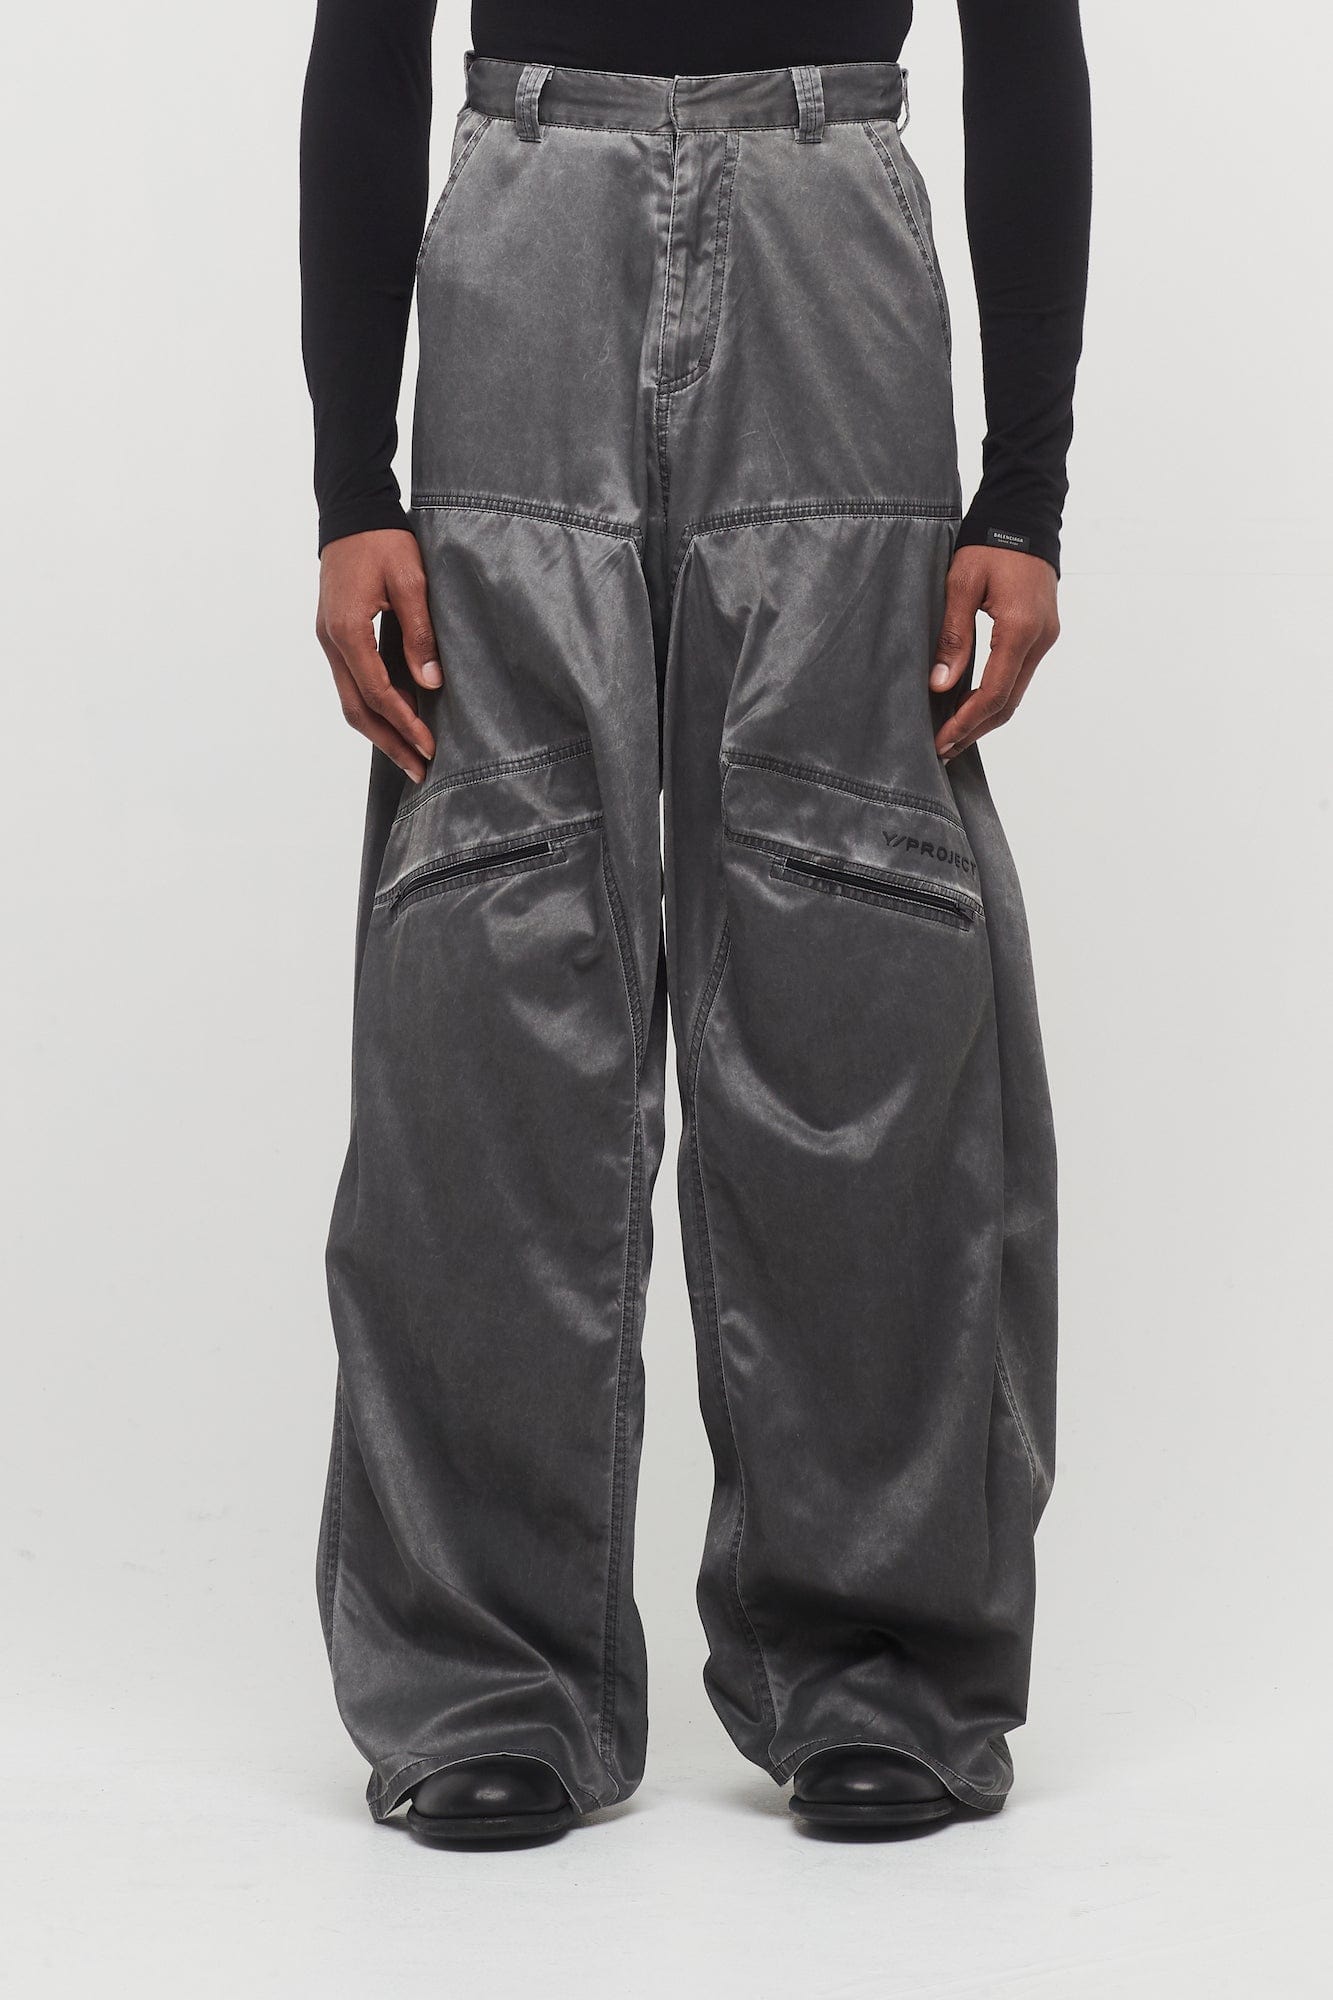 Y/Project Pop Up Pants in Washed Black